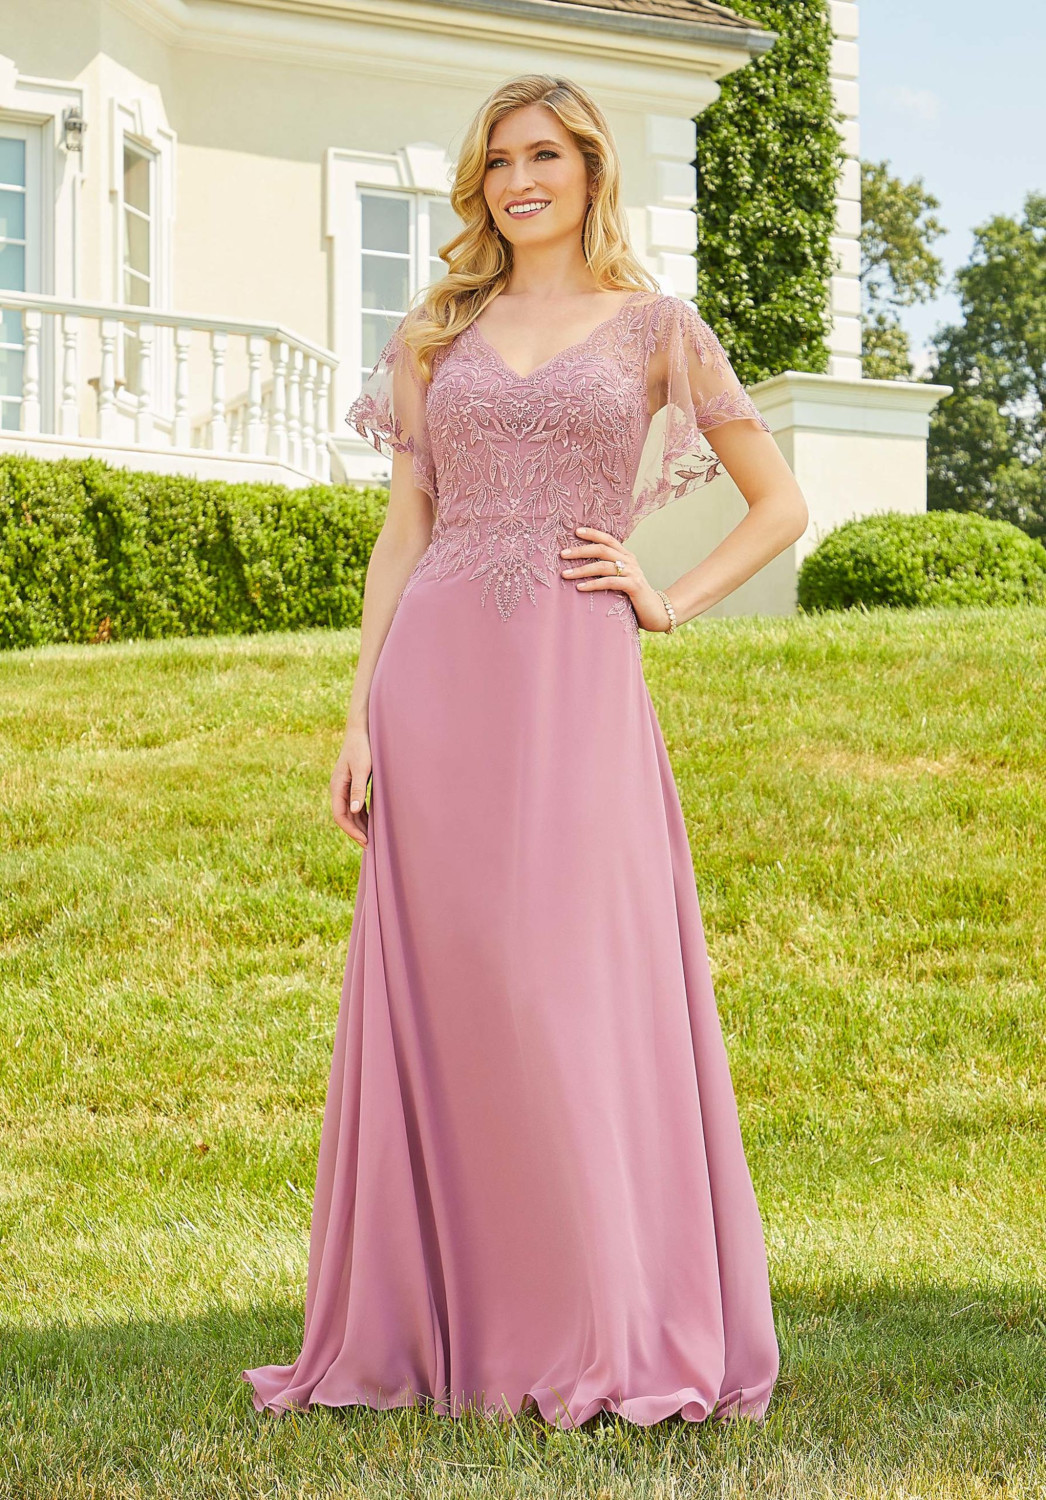 Delicate chiffon evening gown  72517